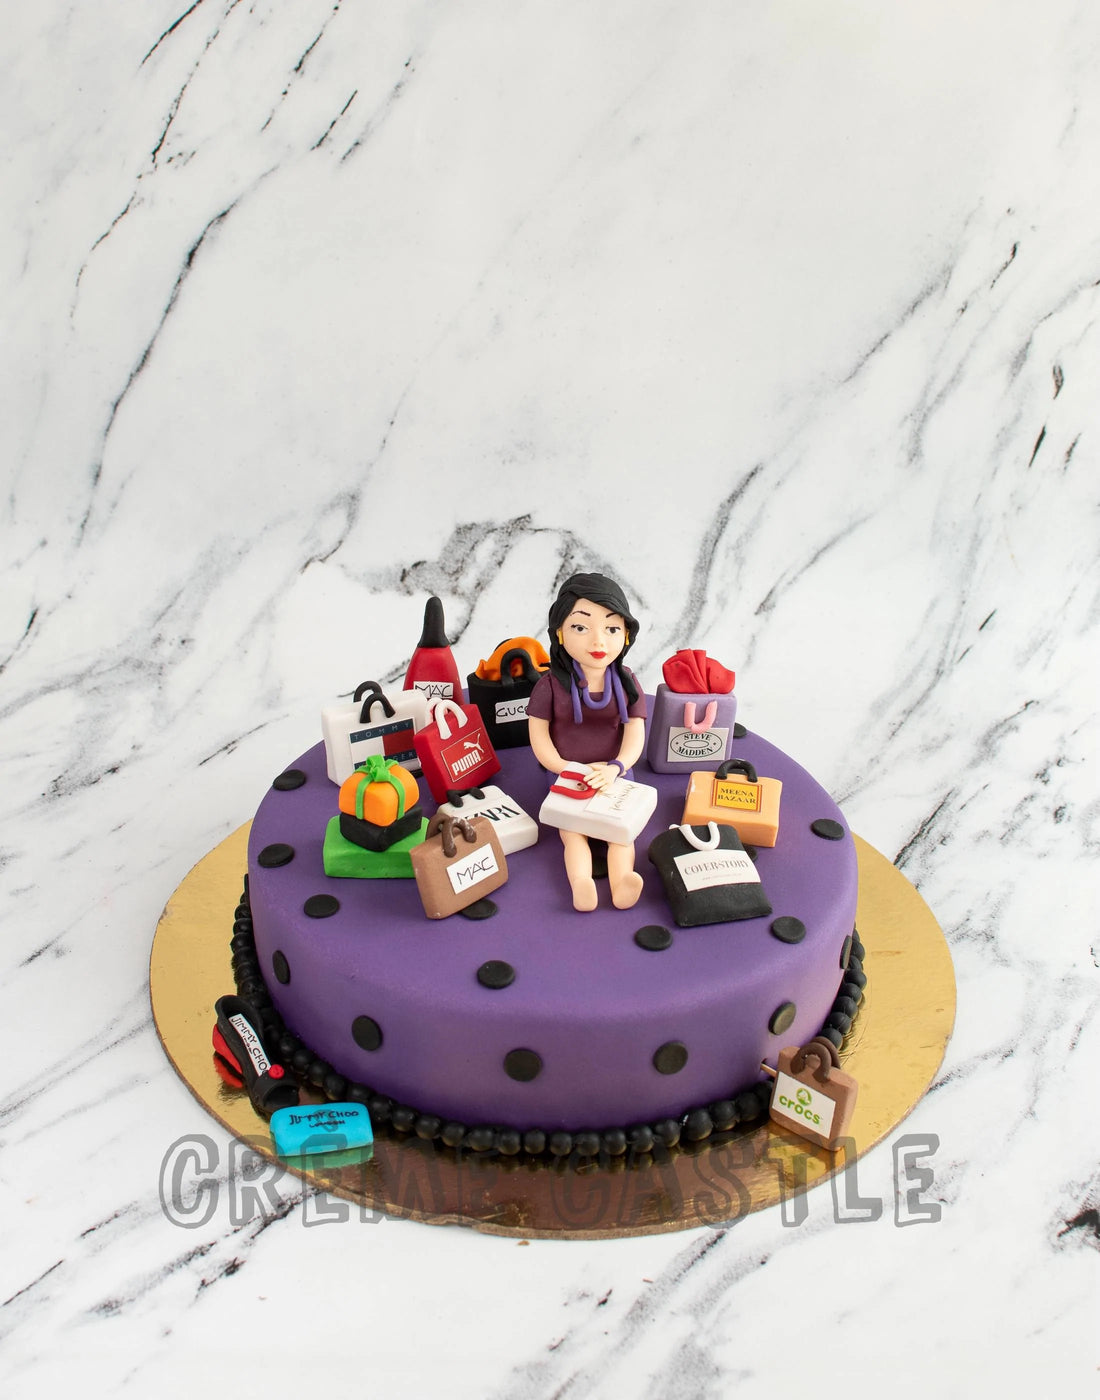 Makeup Theme Cake in Purple by Creme Castle